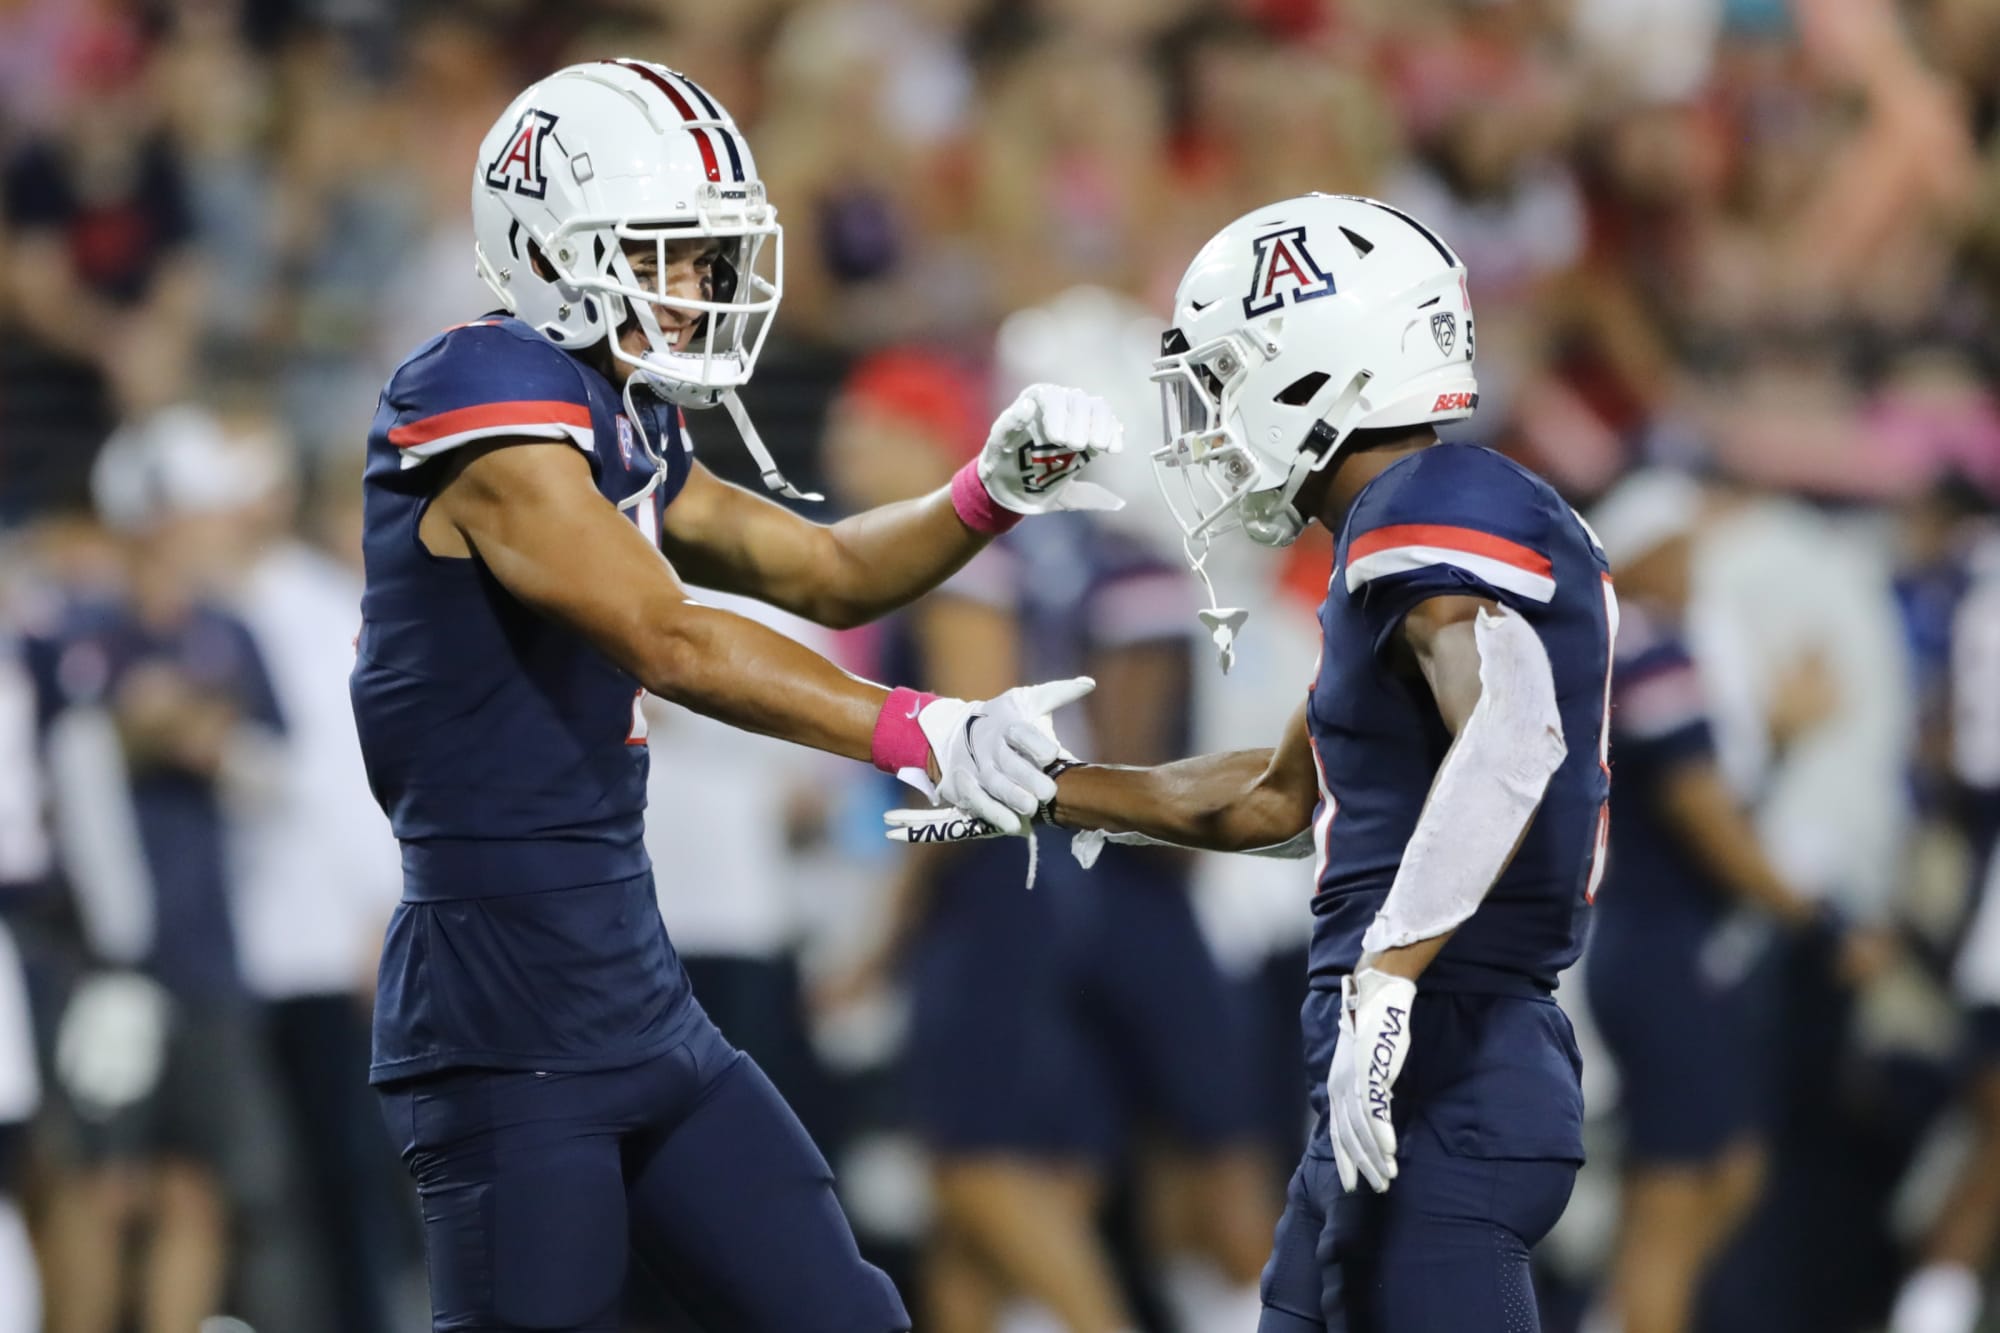 Arizona Football picks up first Pac-12 win with romping of Colorado